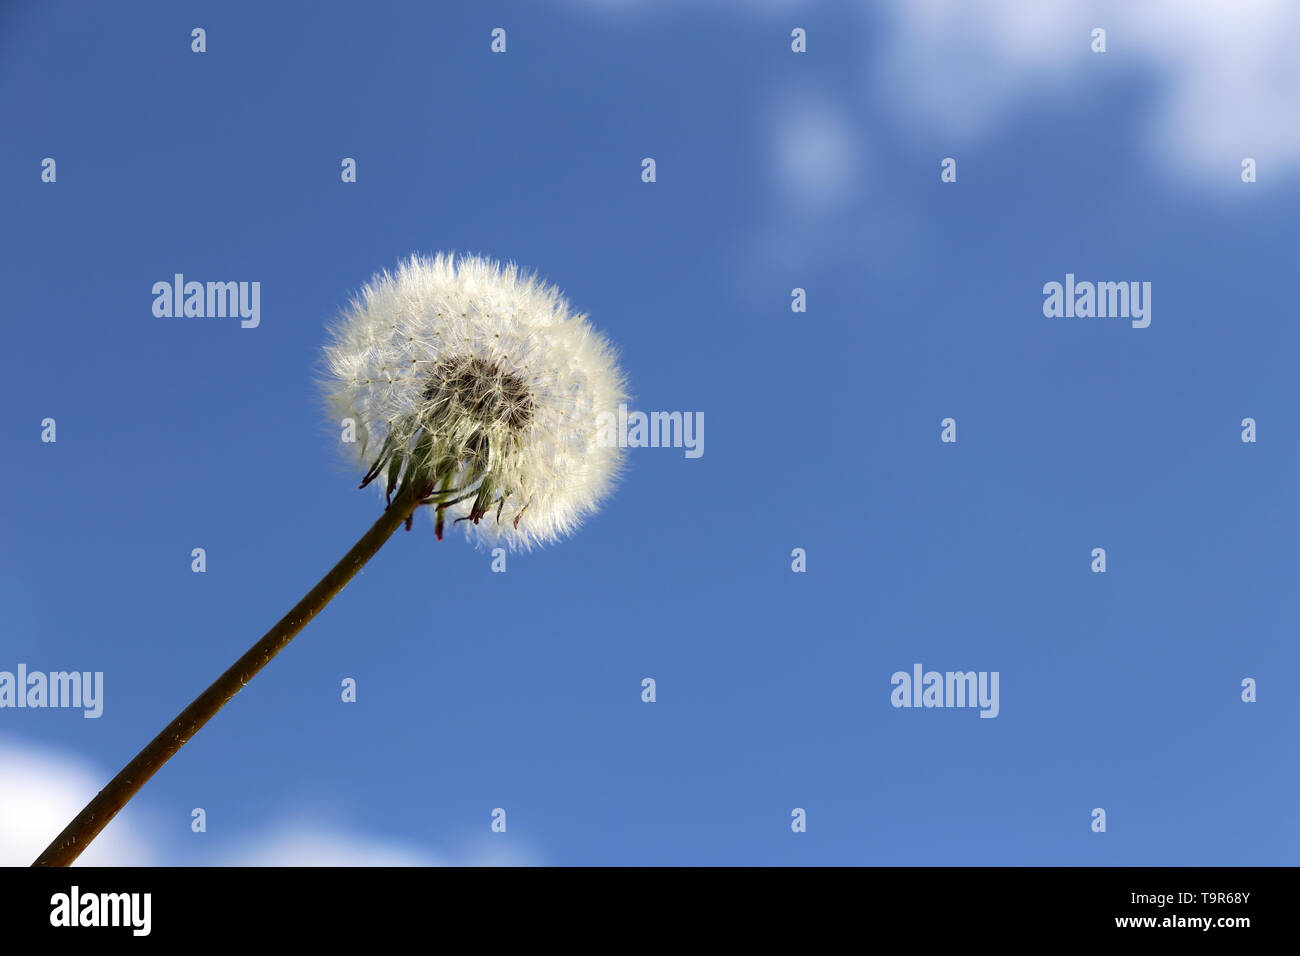 Dandelion seed head against the blue sky with white clouds. Beautiful dandelion, ready to fly Stock Photo